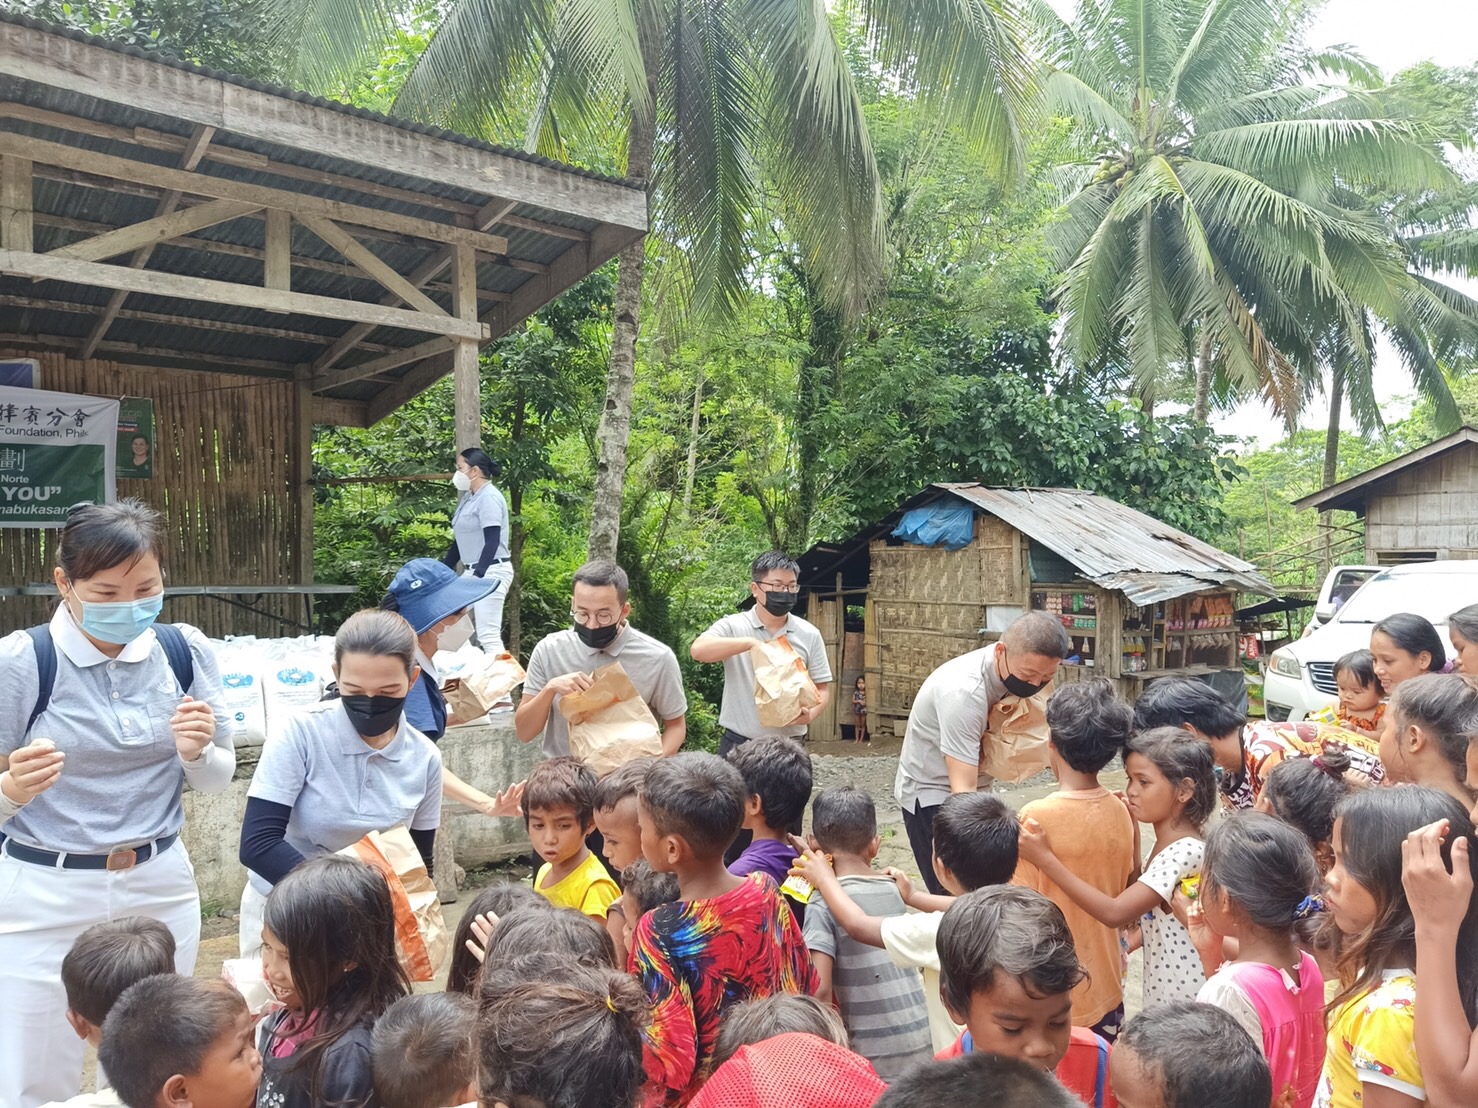 Volunteers distribute vegetable buns and candies to the farmers’ children.